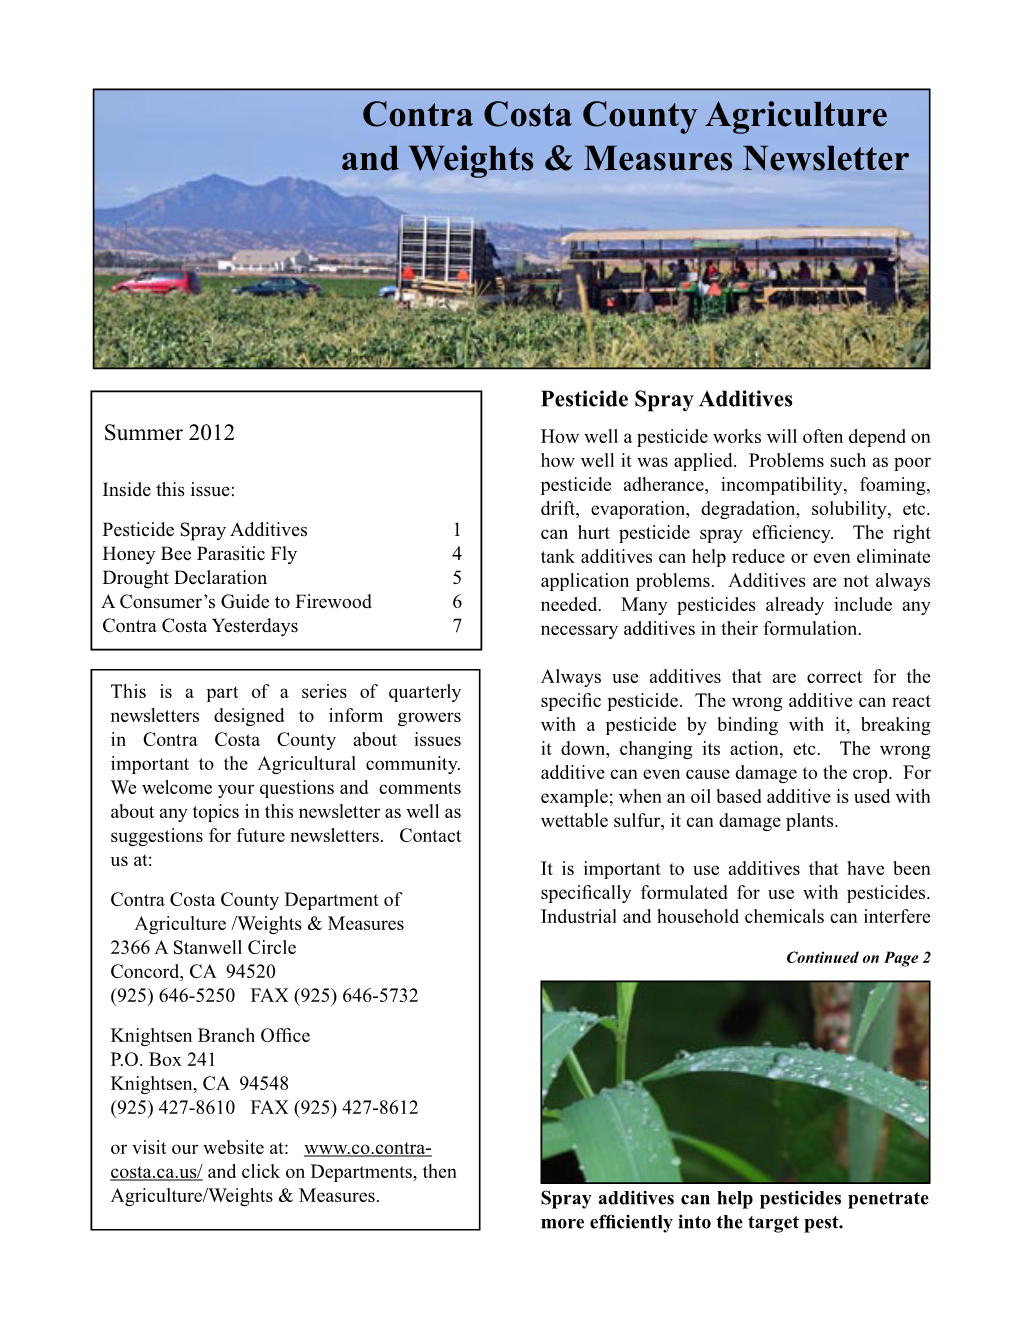 Contra Costa County Agriculture and Weights & Measures Newsletter